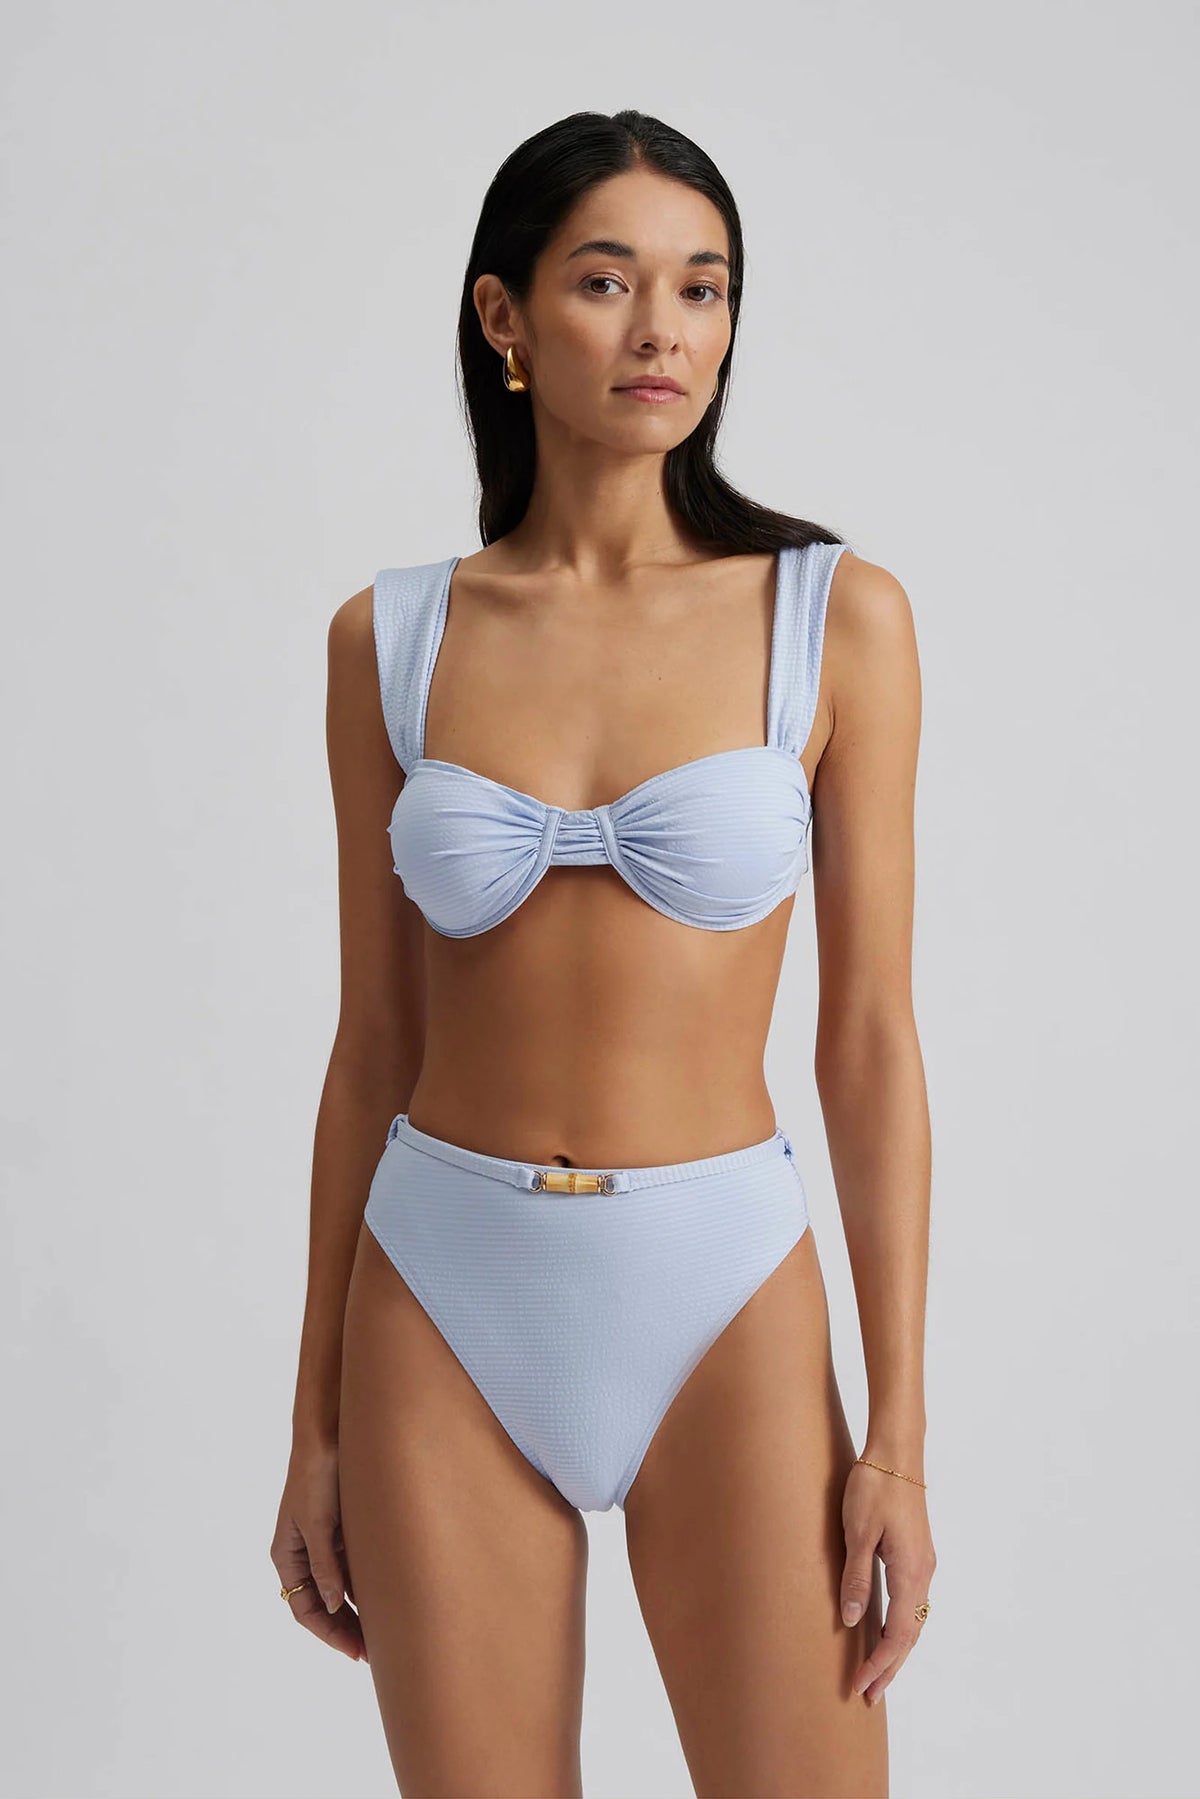 Baby blue textured fabric bikini top with under wire and wide straps